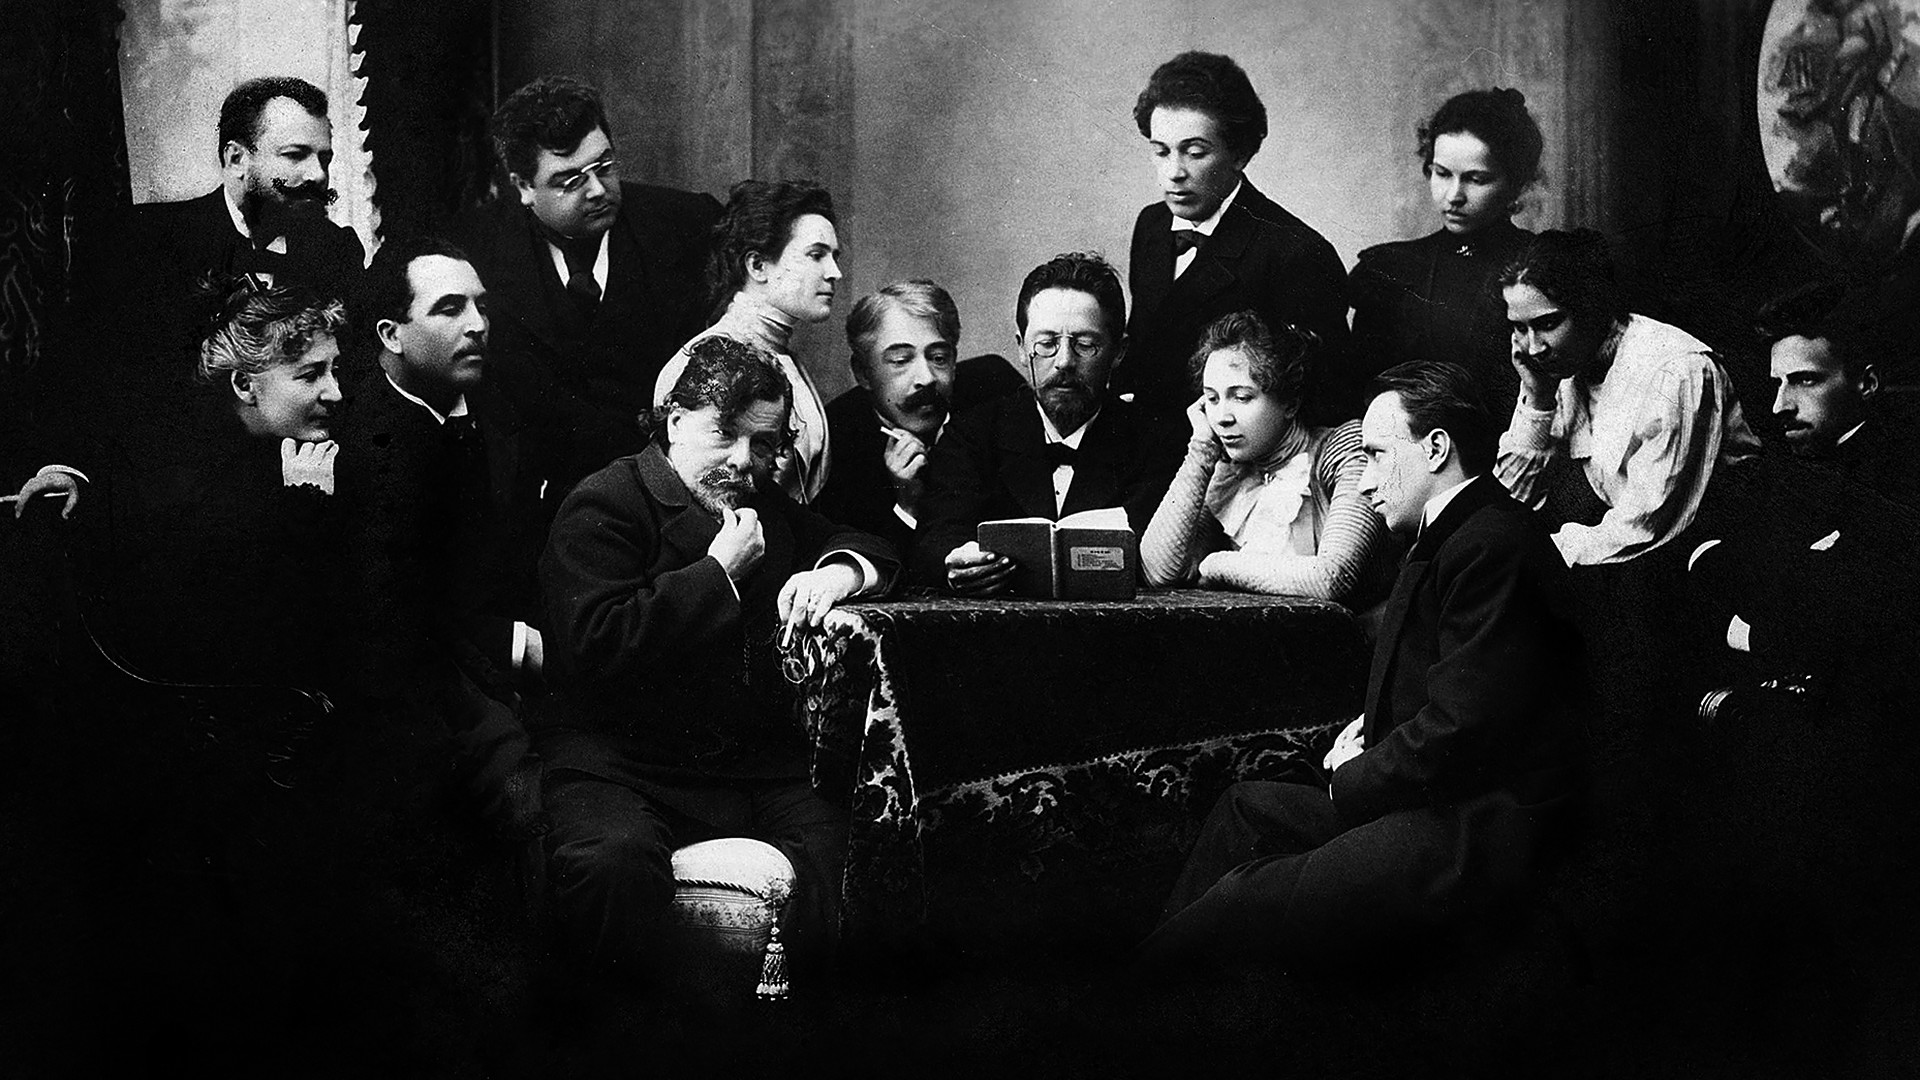 Chekhov reading 'The Seagull' to a group of actors of the Moscow Art Theater; among them are Konstantin Stanislavsky (left from Chekhov), Olga Knipper (second left from Chekhov), Vsevolod Meyerhold (right), and Vladimir Nemirovich Danchenko (stands left)